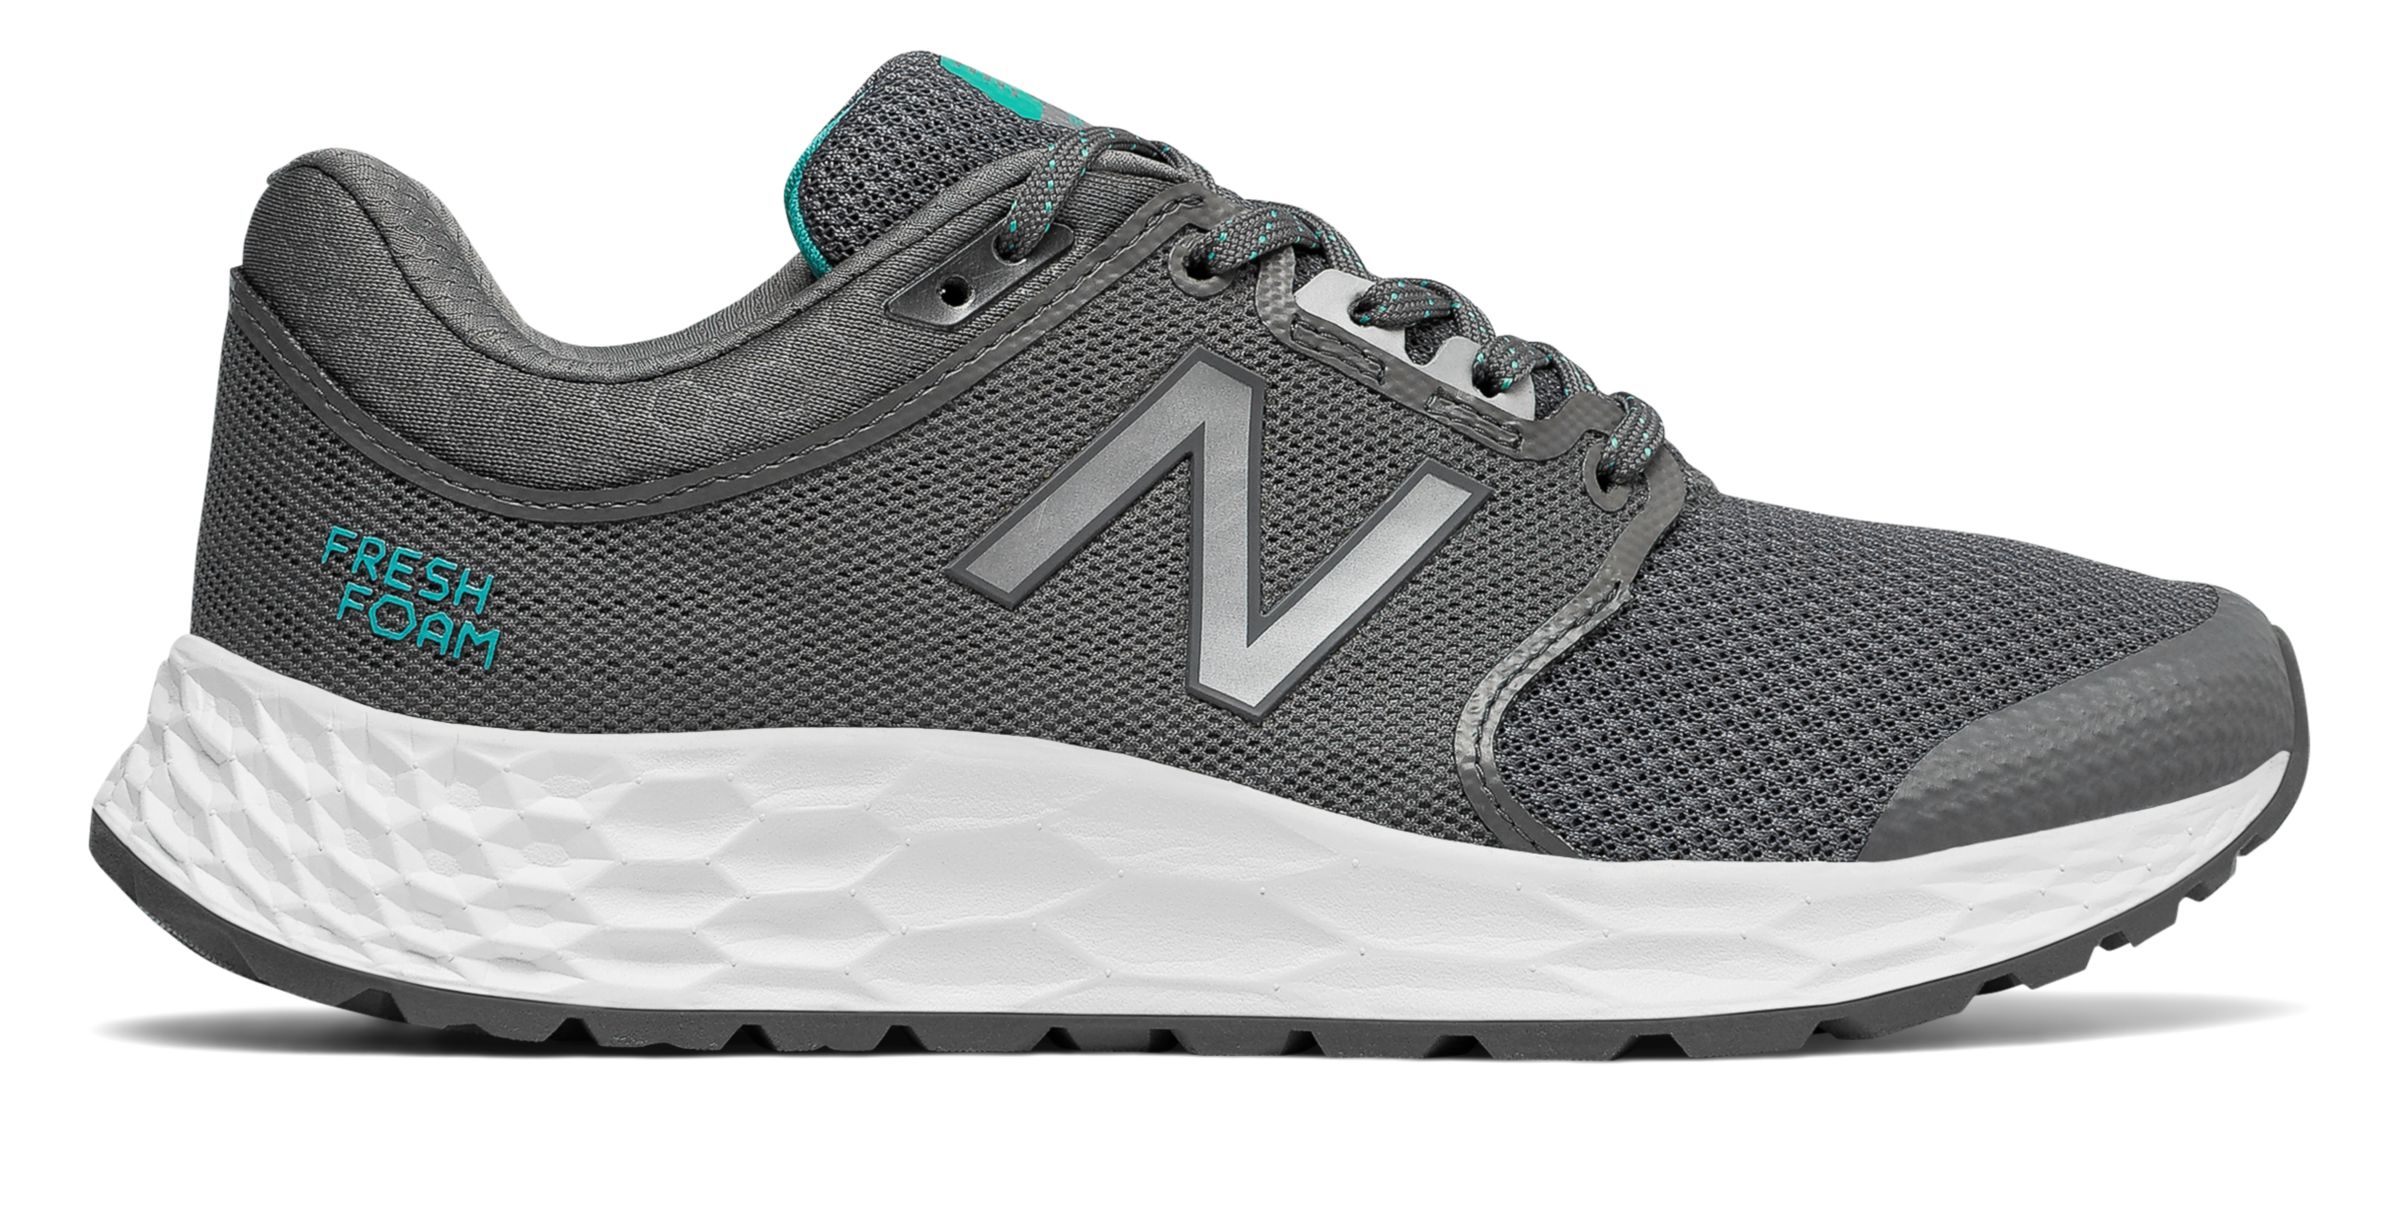 Women's Walking Sneakers - Comfortable Stability Shoes - New Balance